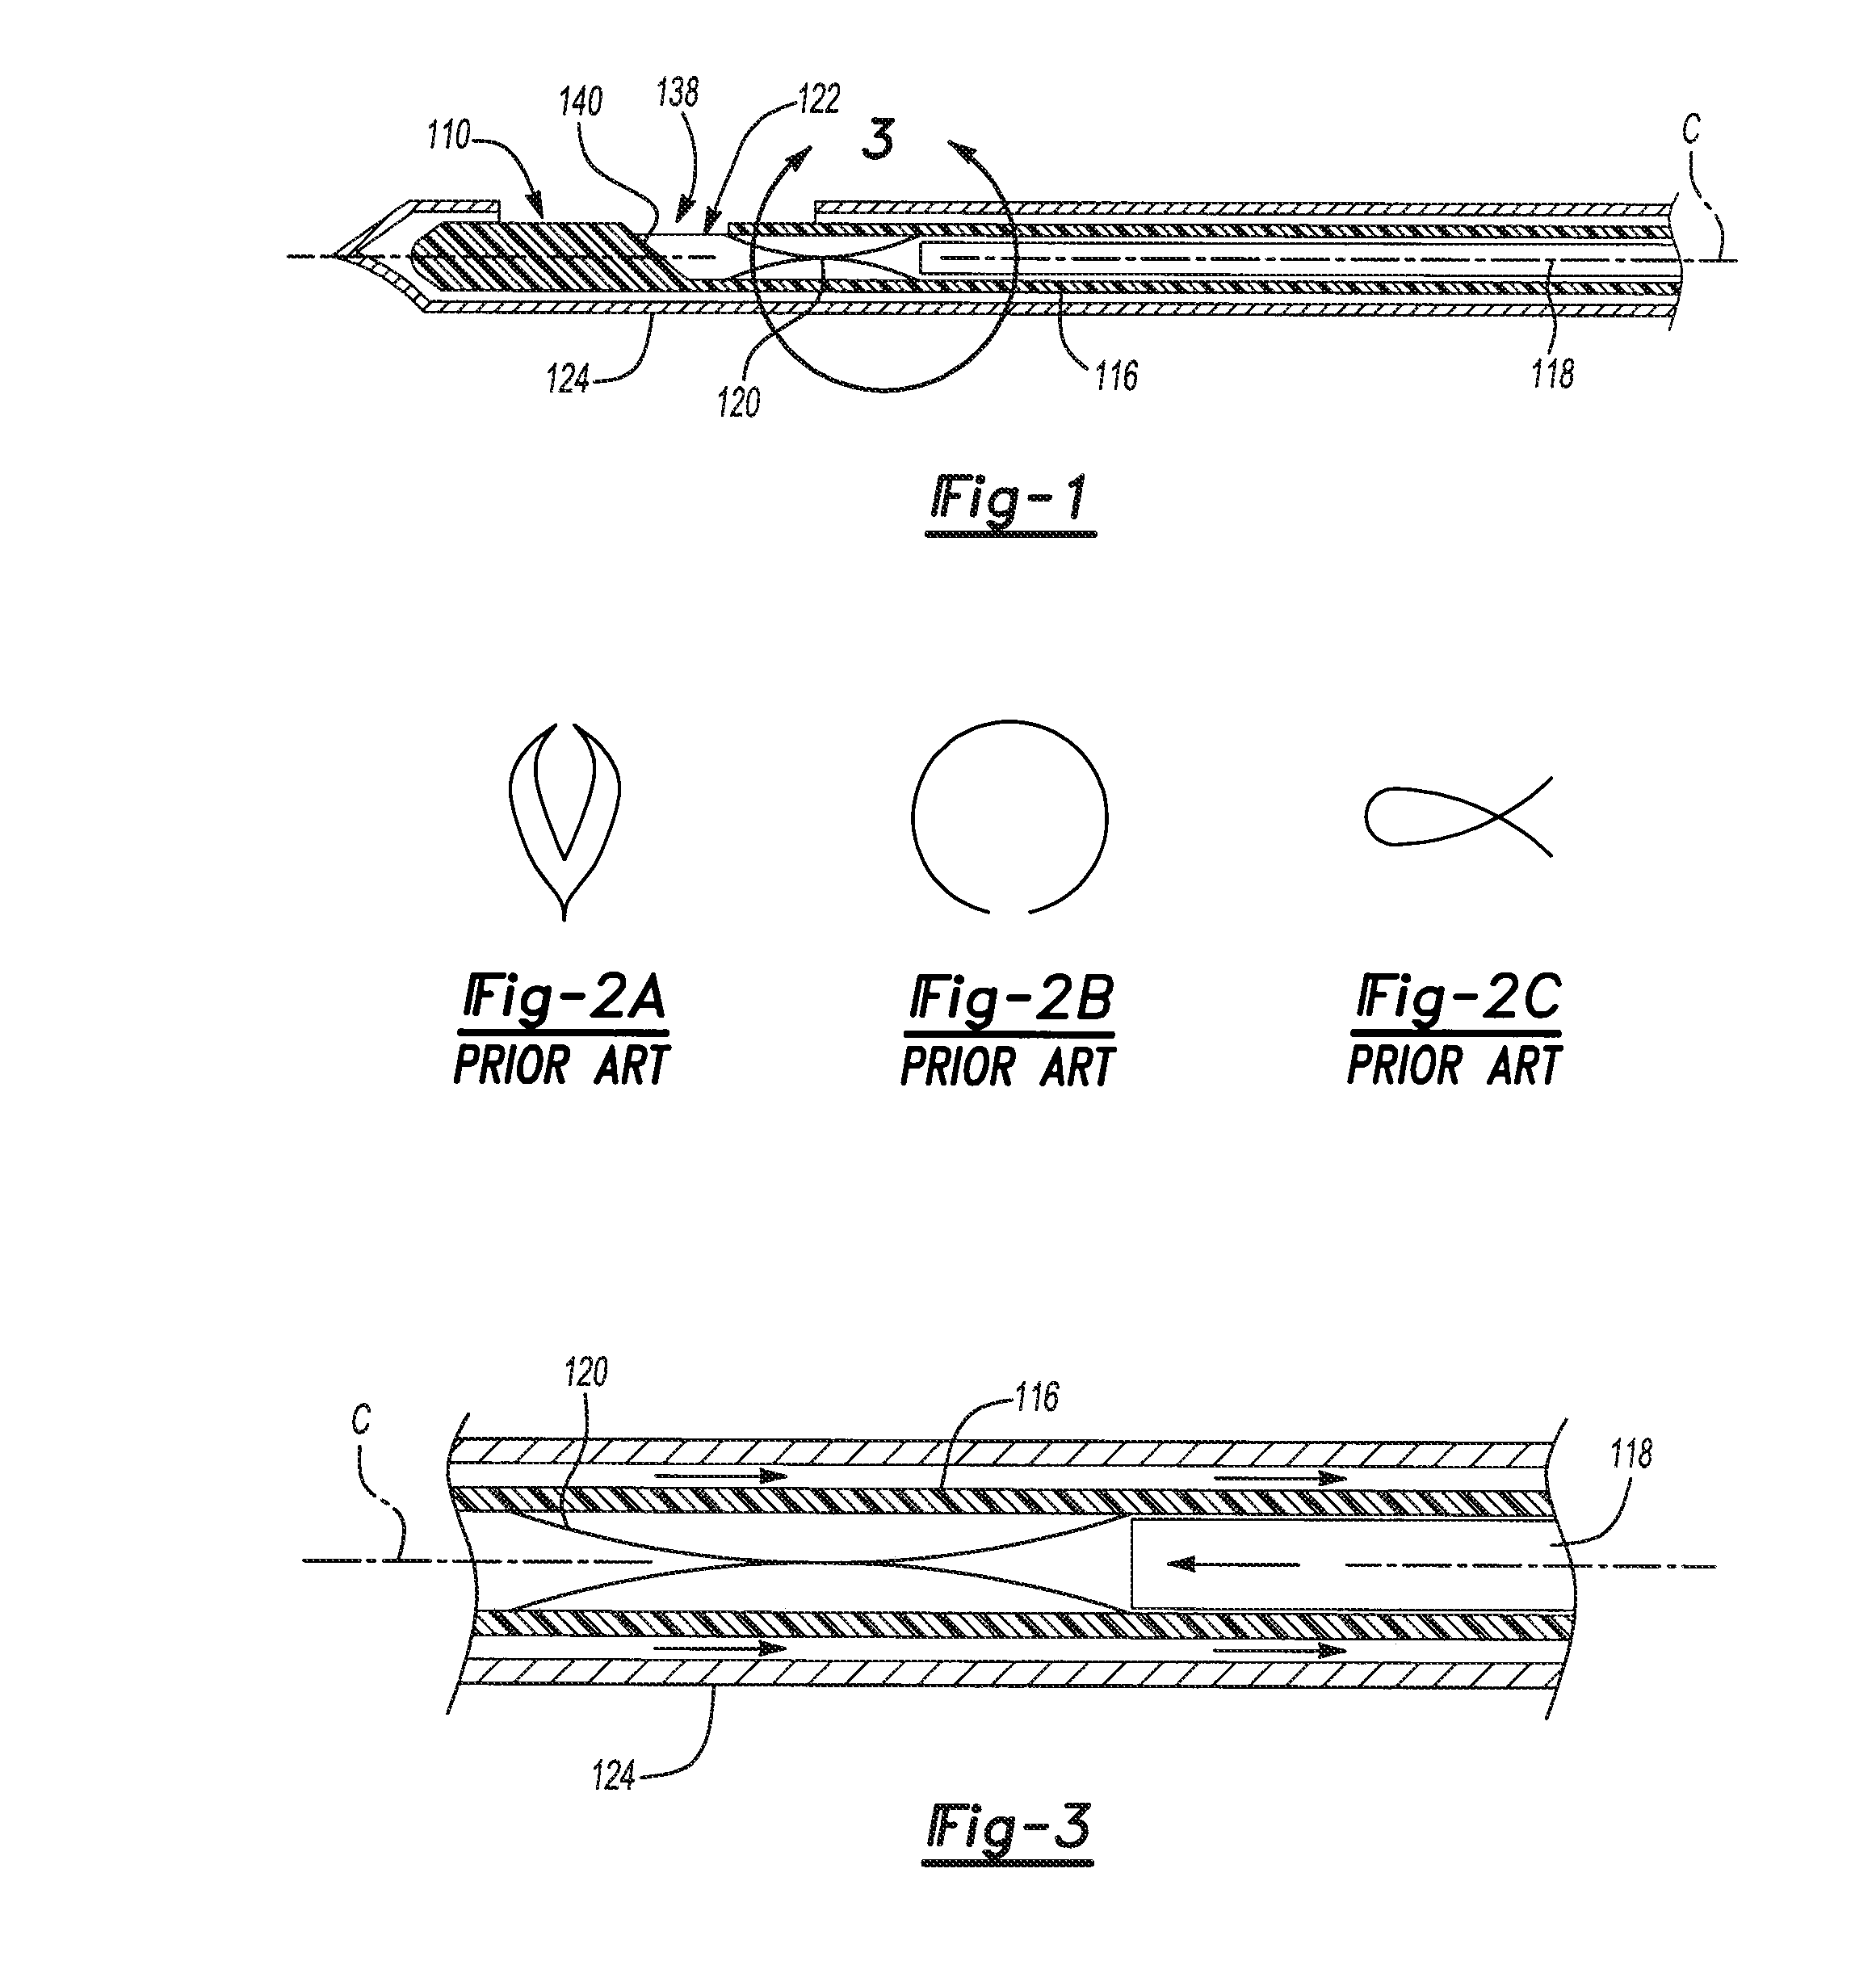 Biopsy devices and methods